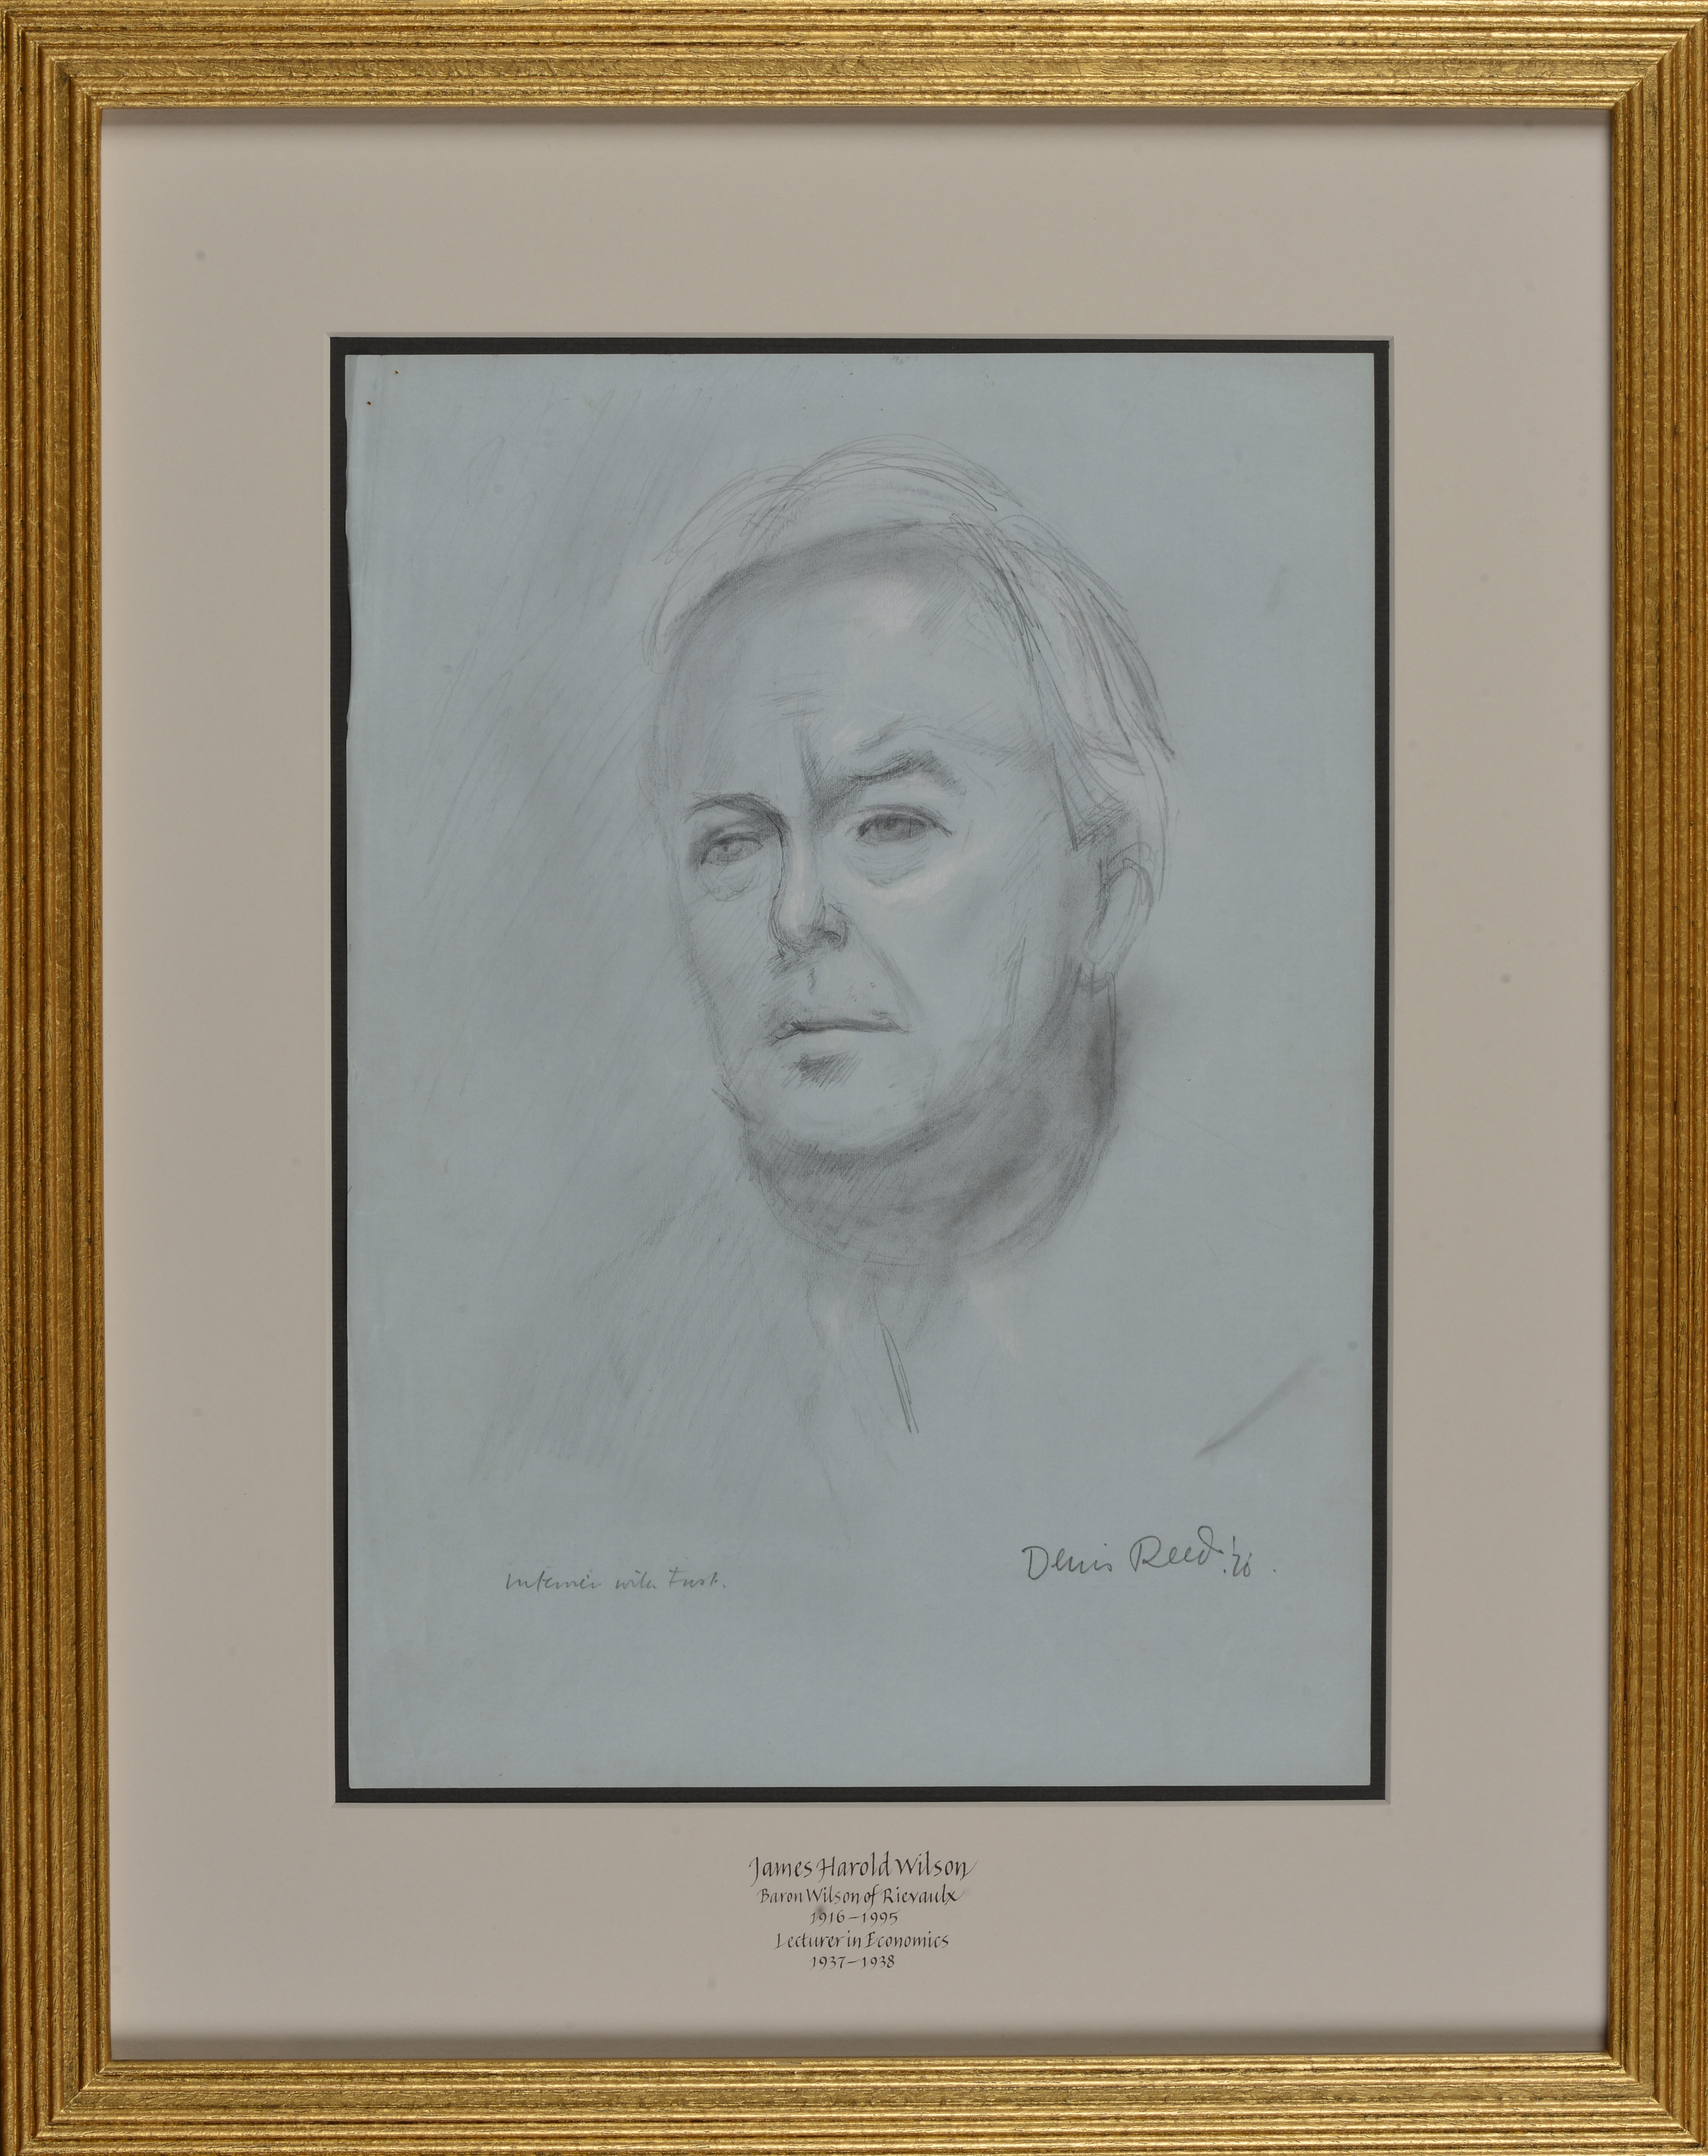 Harold Wilson, Lecturer in Economics at New College 1937-38, by Denis William Reed